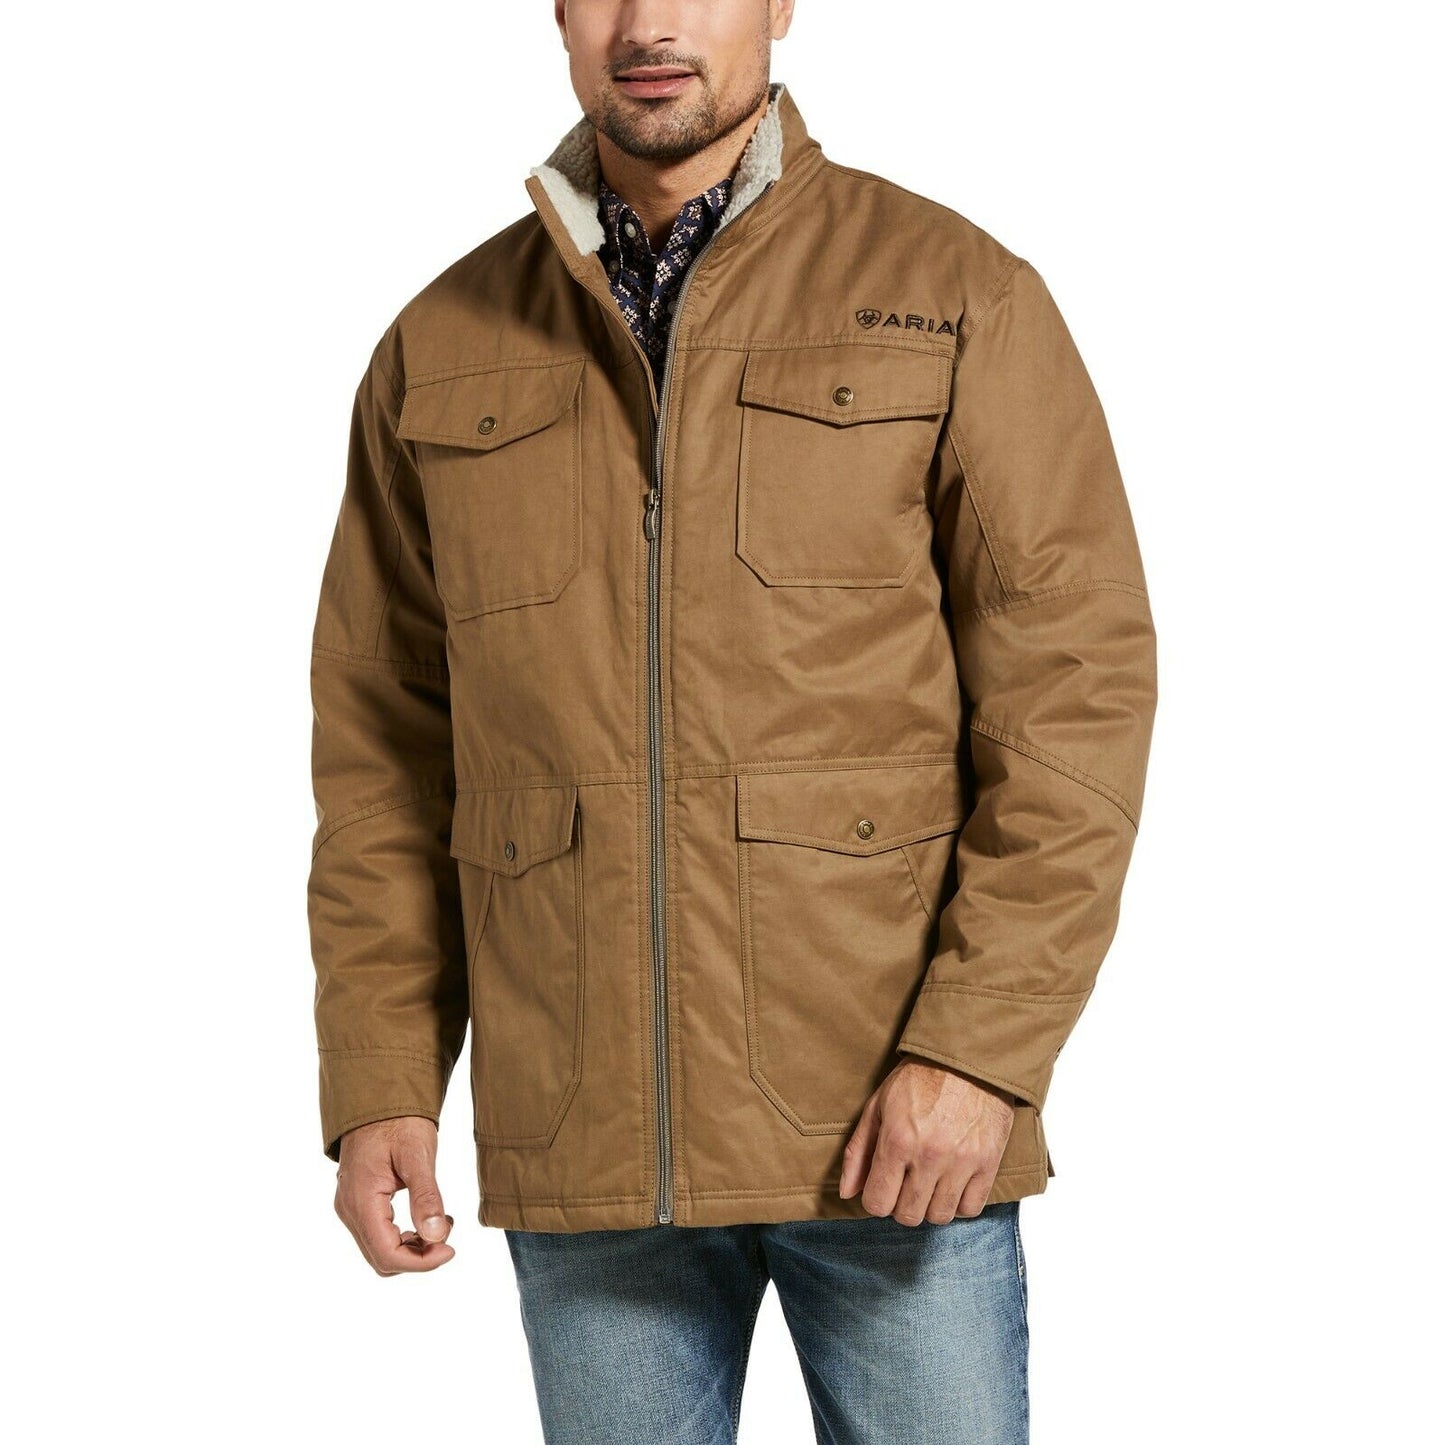 Ariat® Men's Grizzly Field Cub Brown Concealed Carry Jacket 10032897